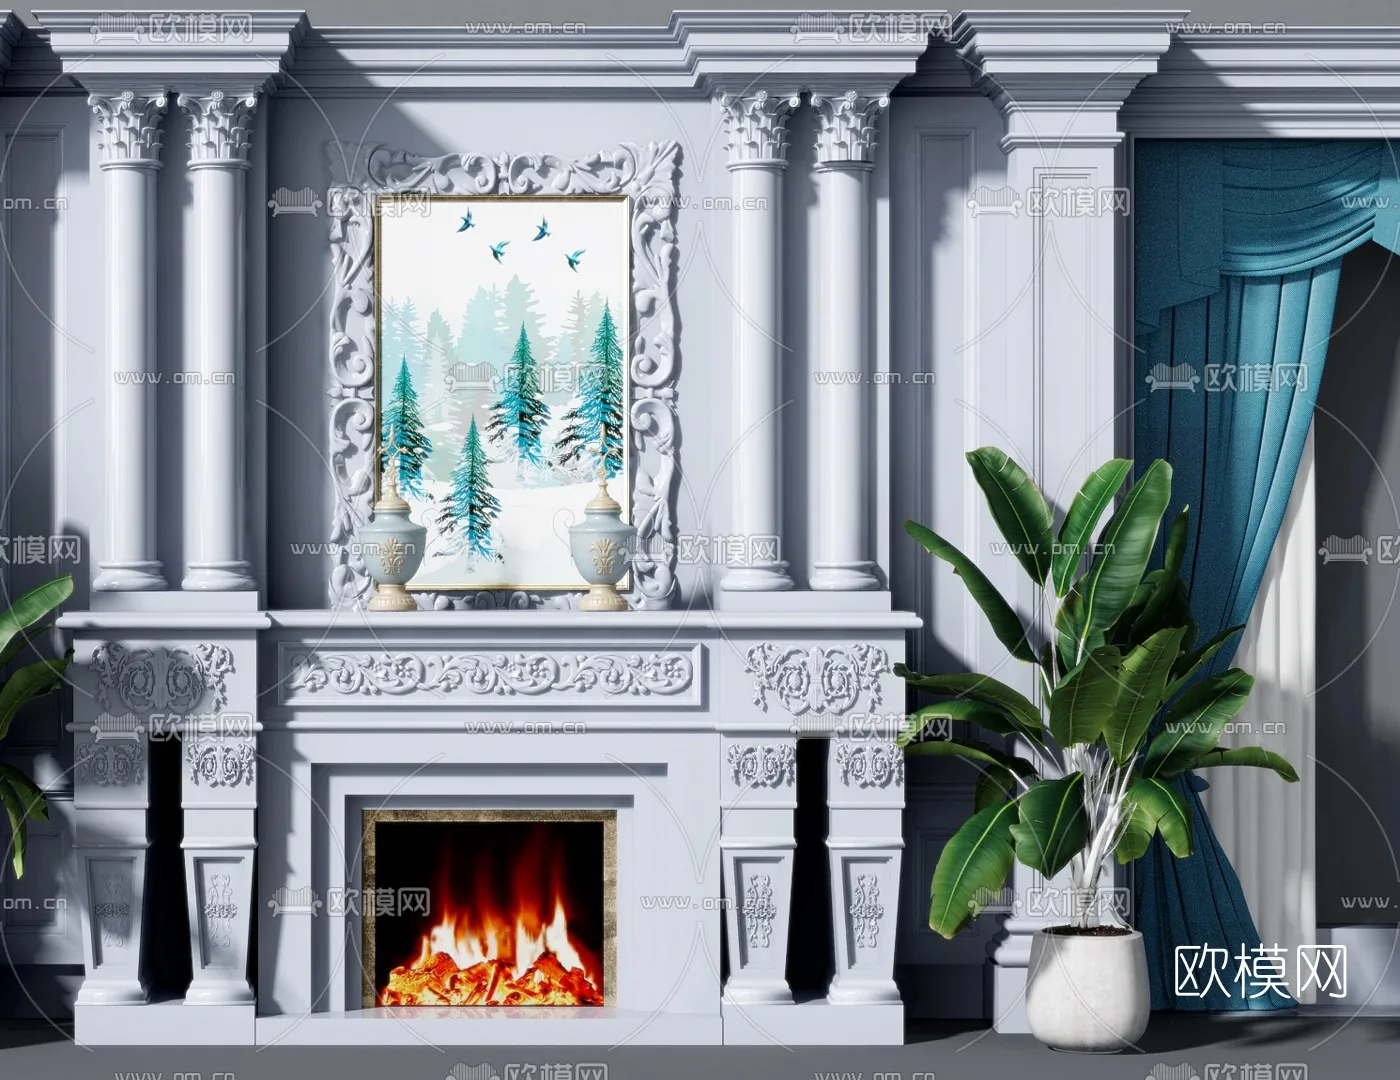 CLASSIC – FIREPLACE 3DMODELS – 002